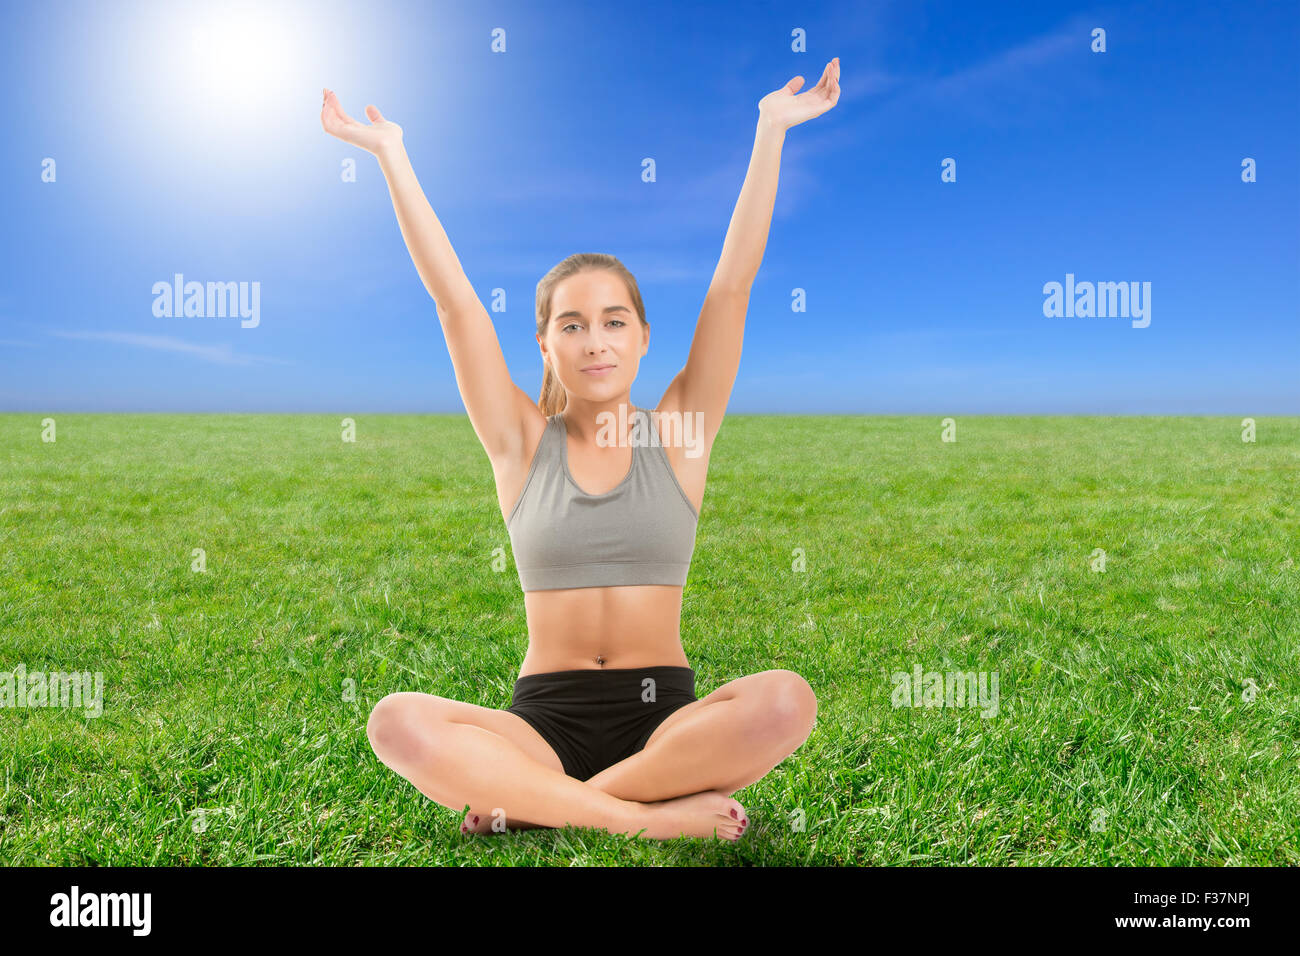 Woman practicing  yoga with her arms in the air sitting on grass, backlit Stock Photo